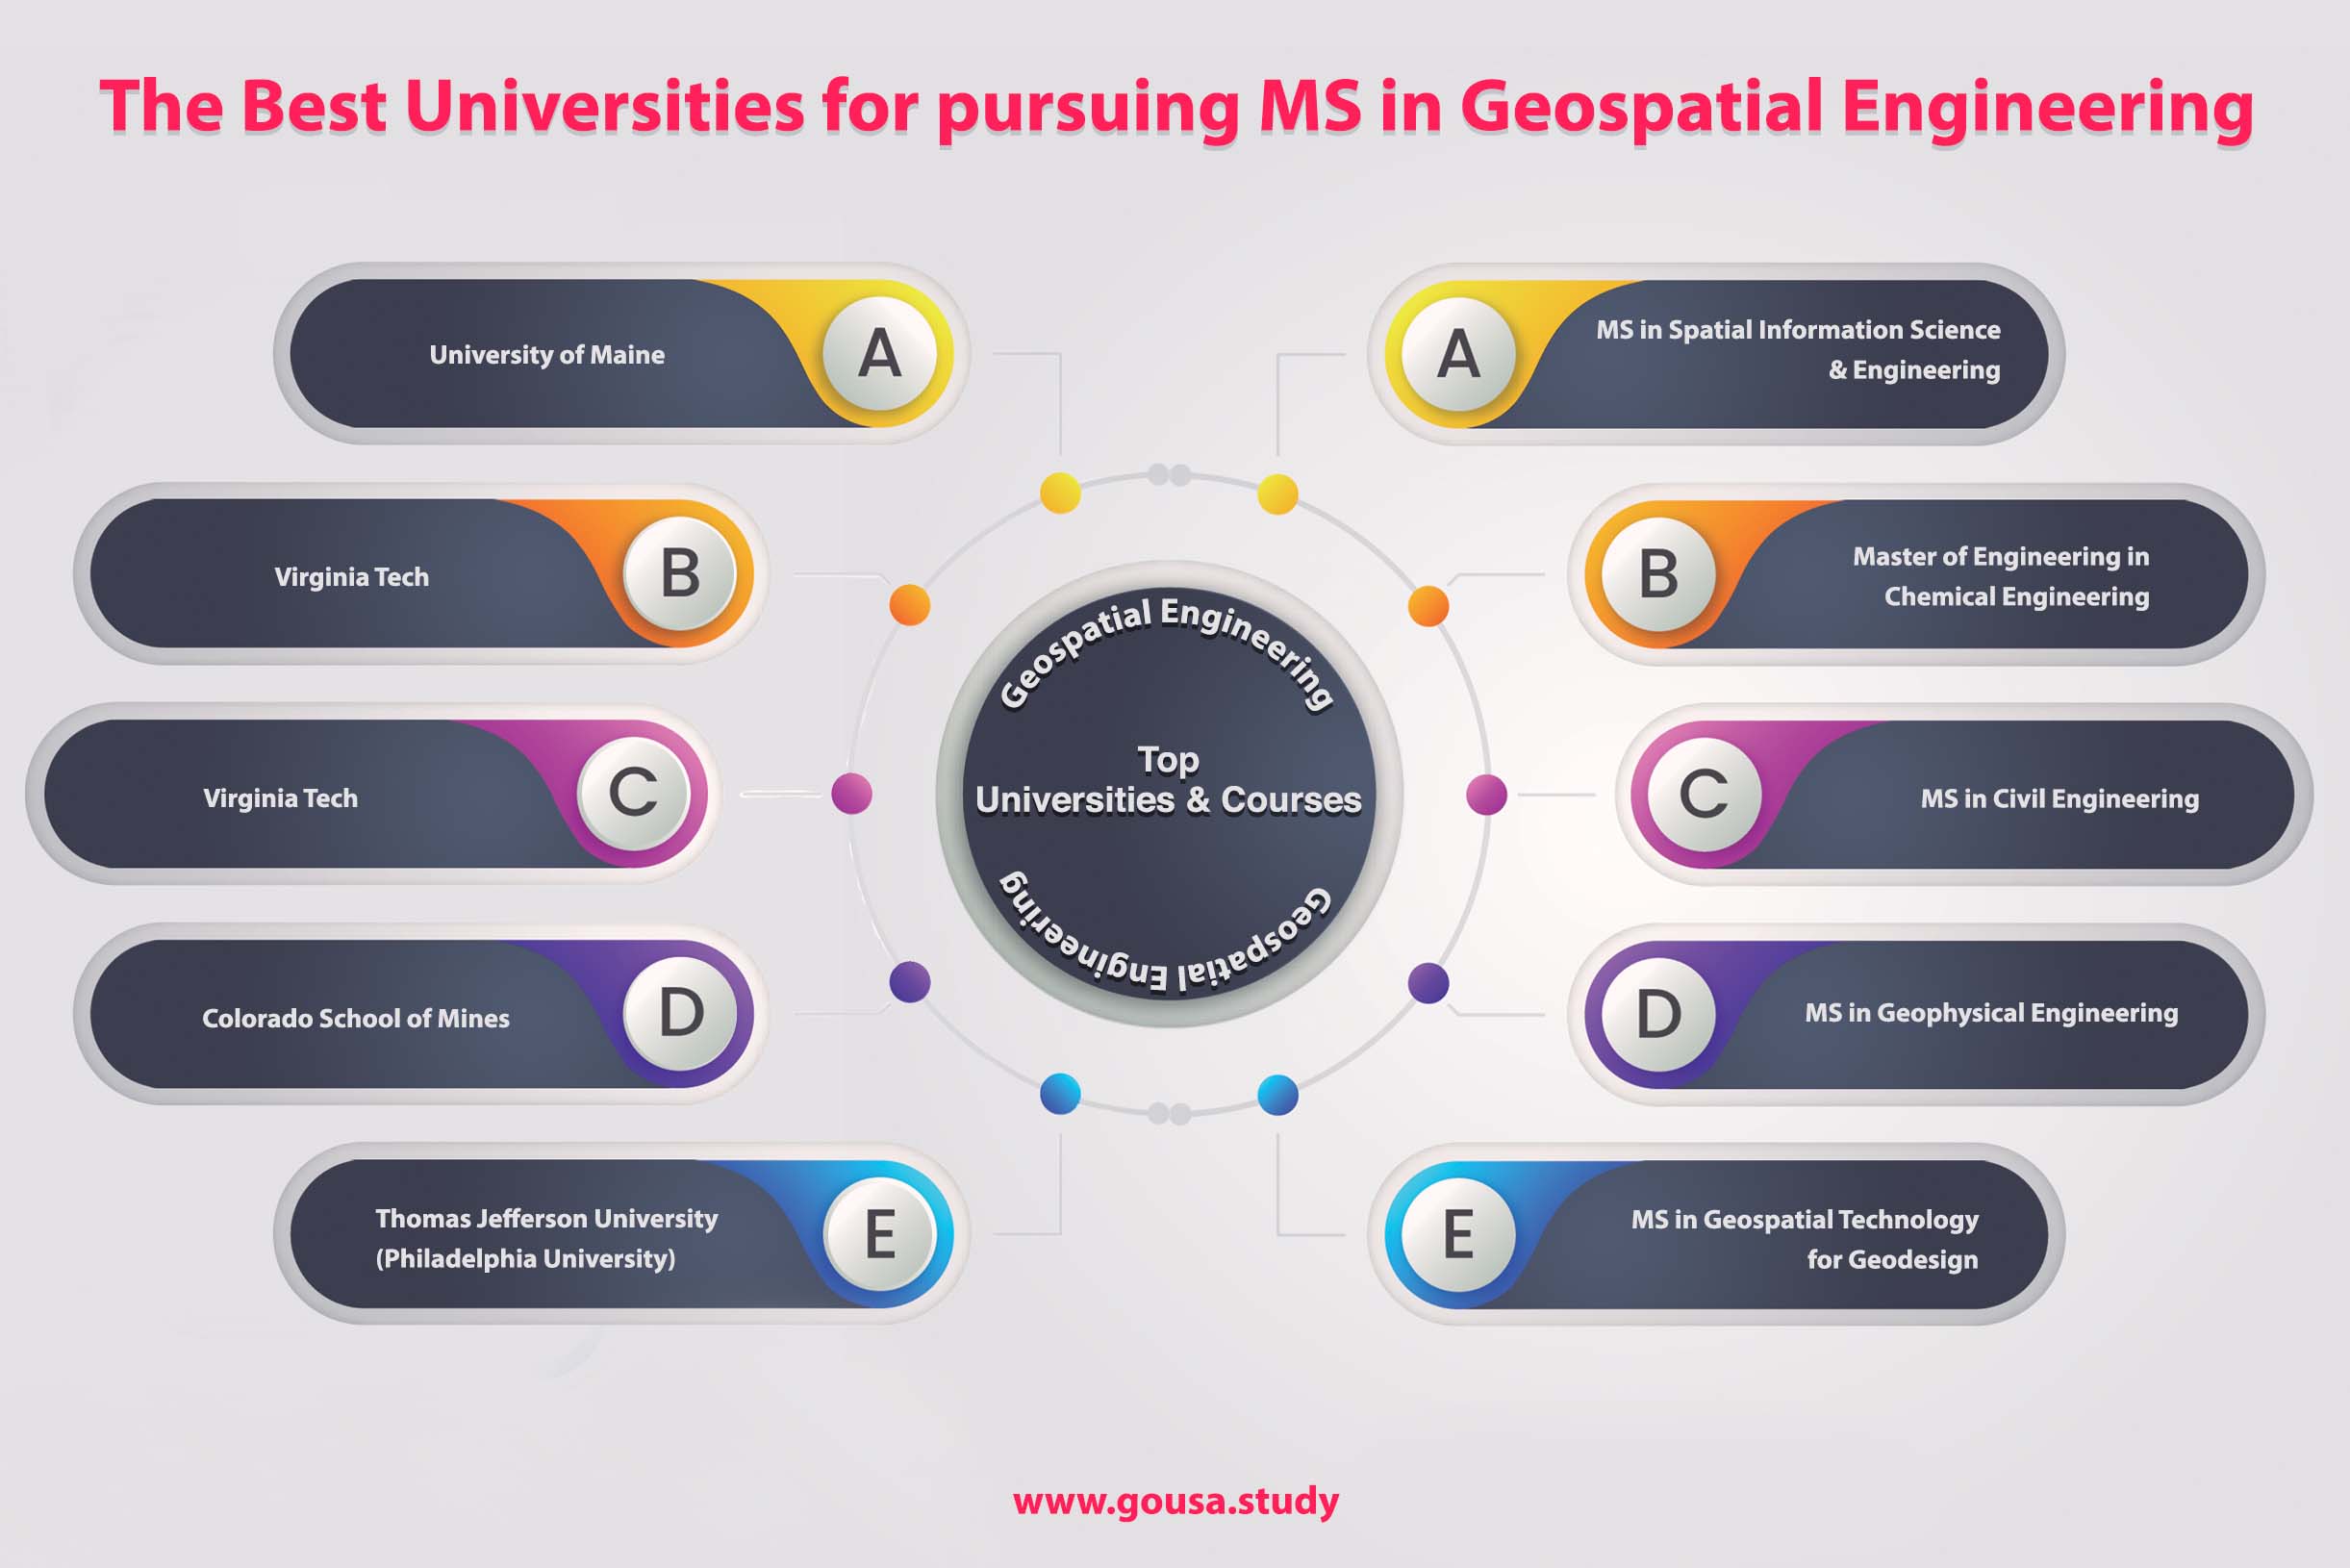 The Best Universities for Pursuing MS in Geospatial Engineering